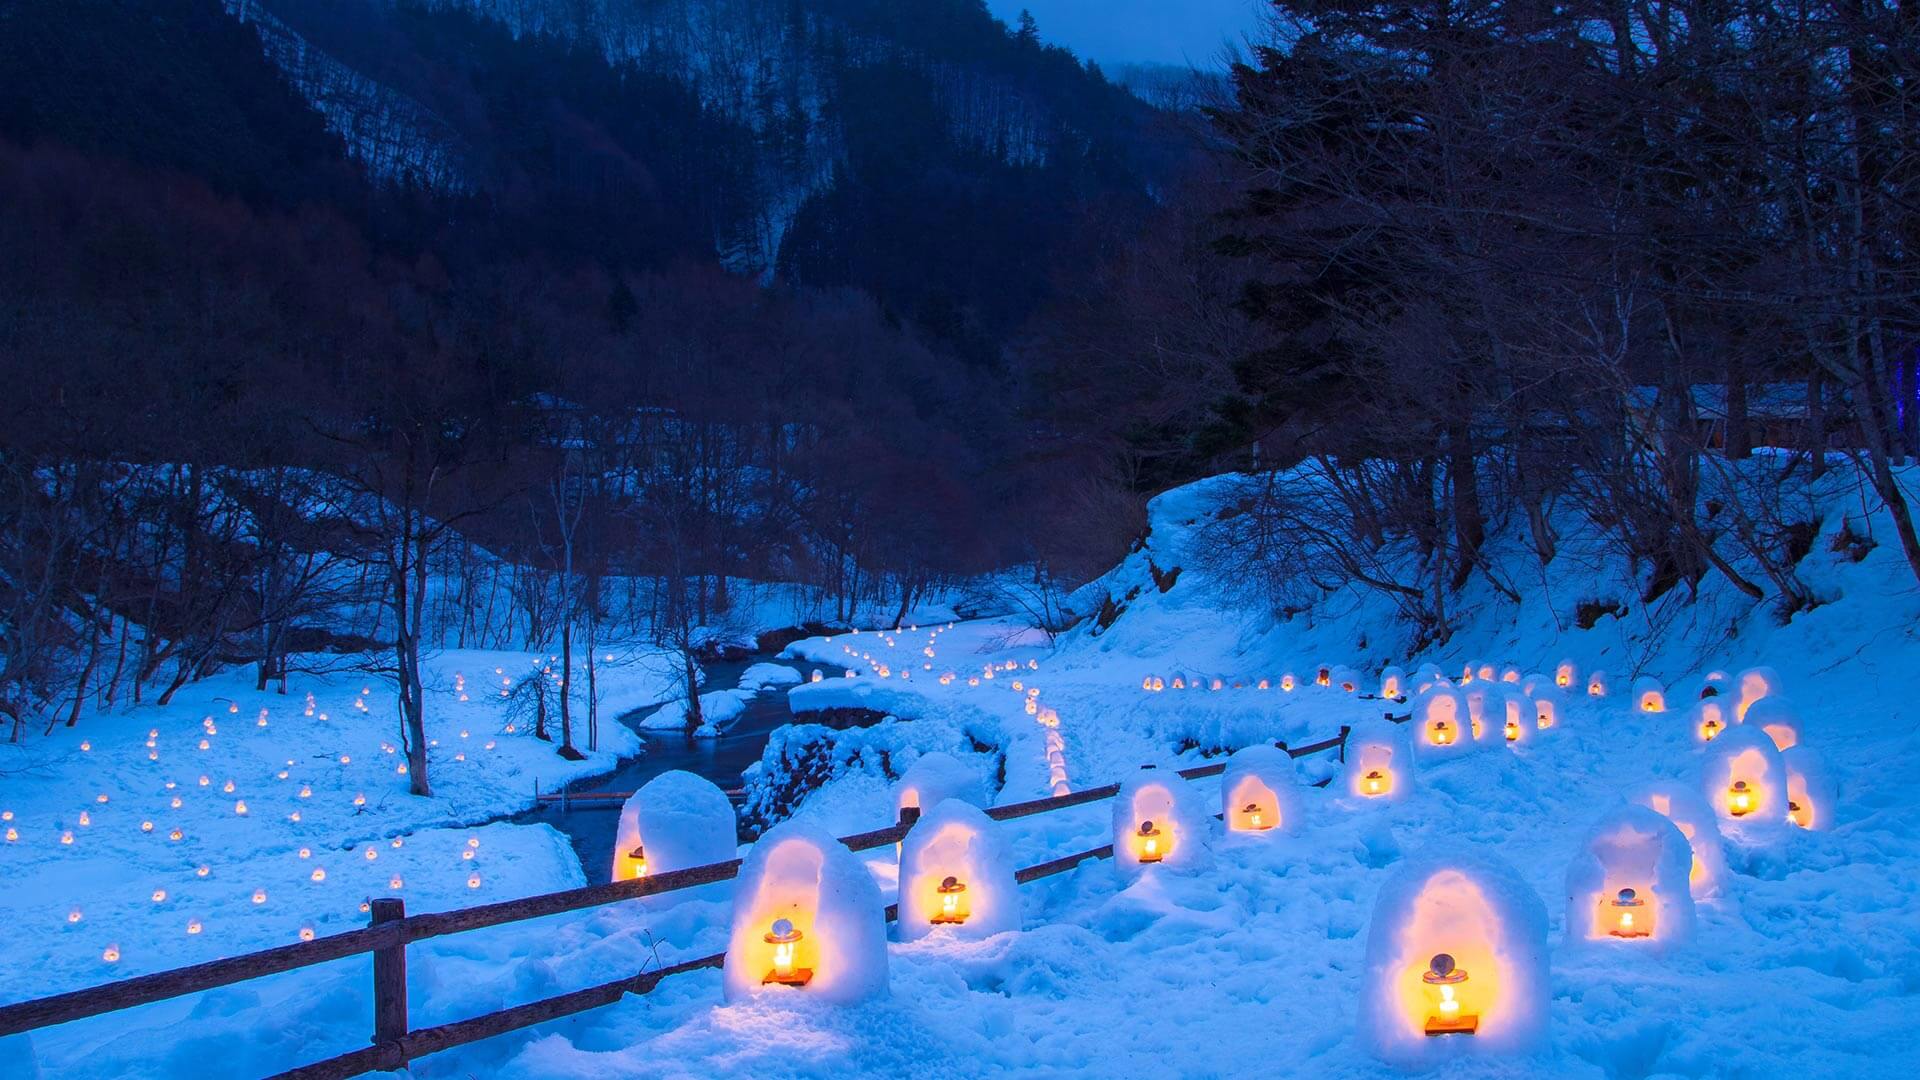 A winter tradition in Japan